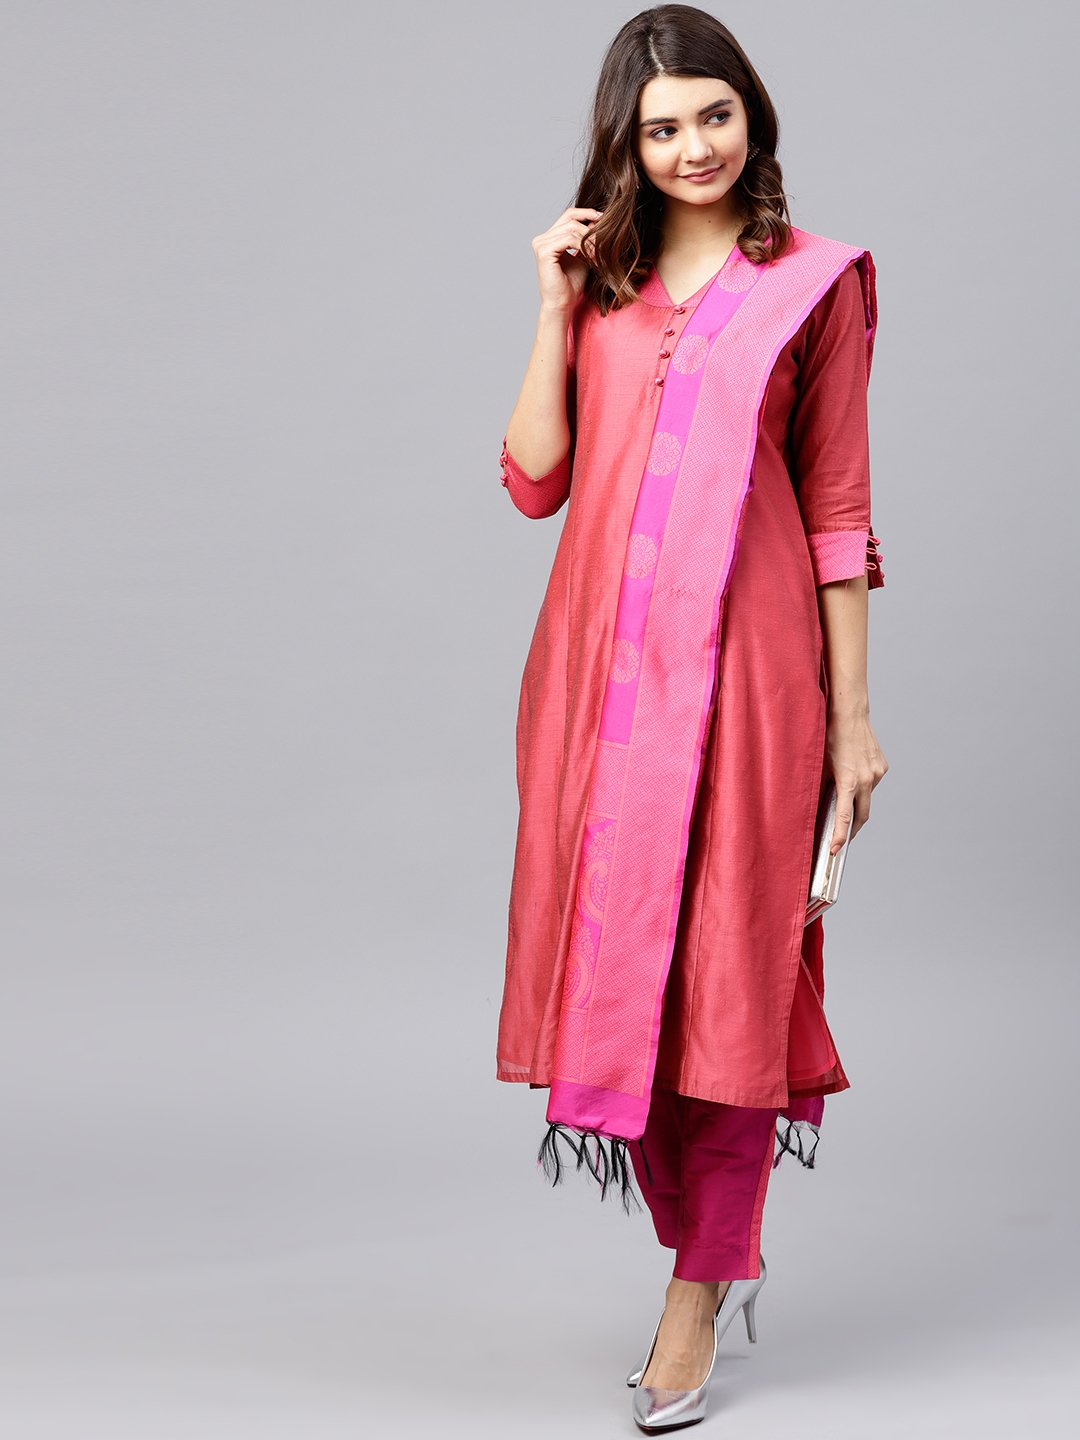 Update more than 91 myntra kurtis with jacket latest - thtantai2